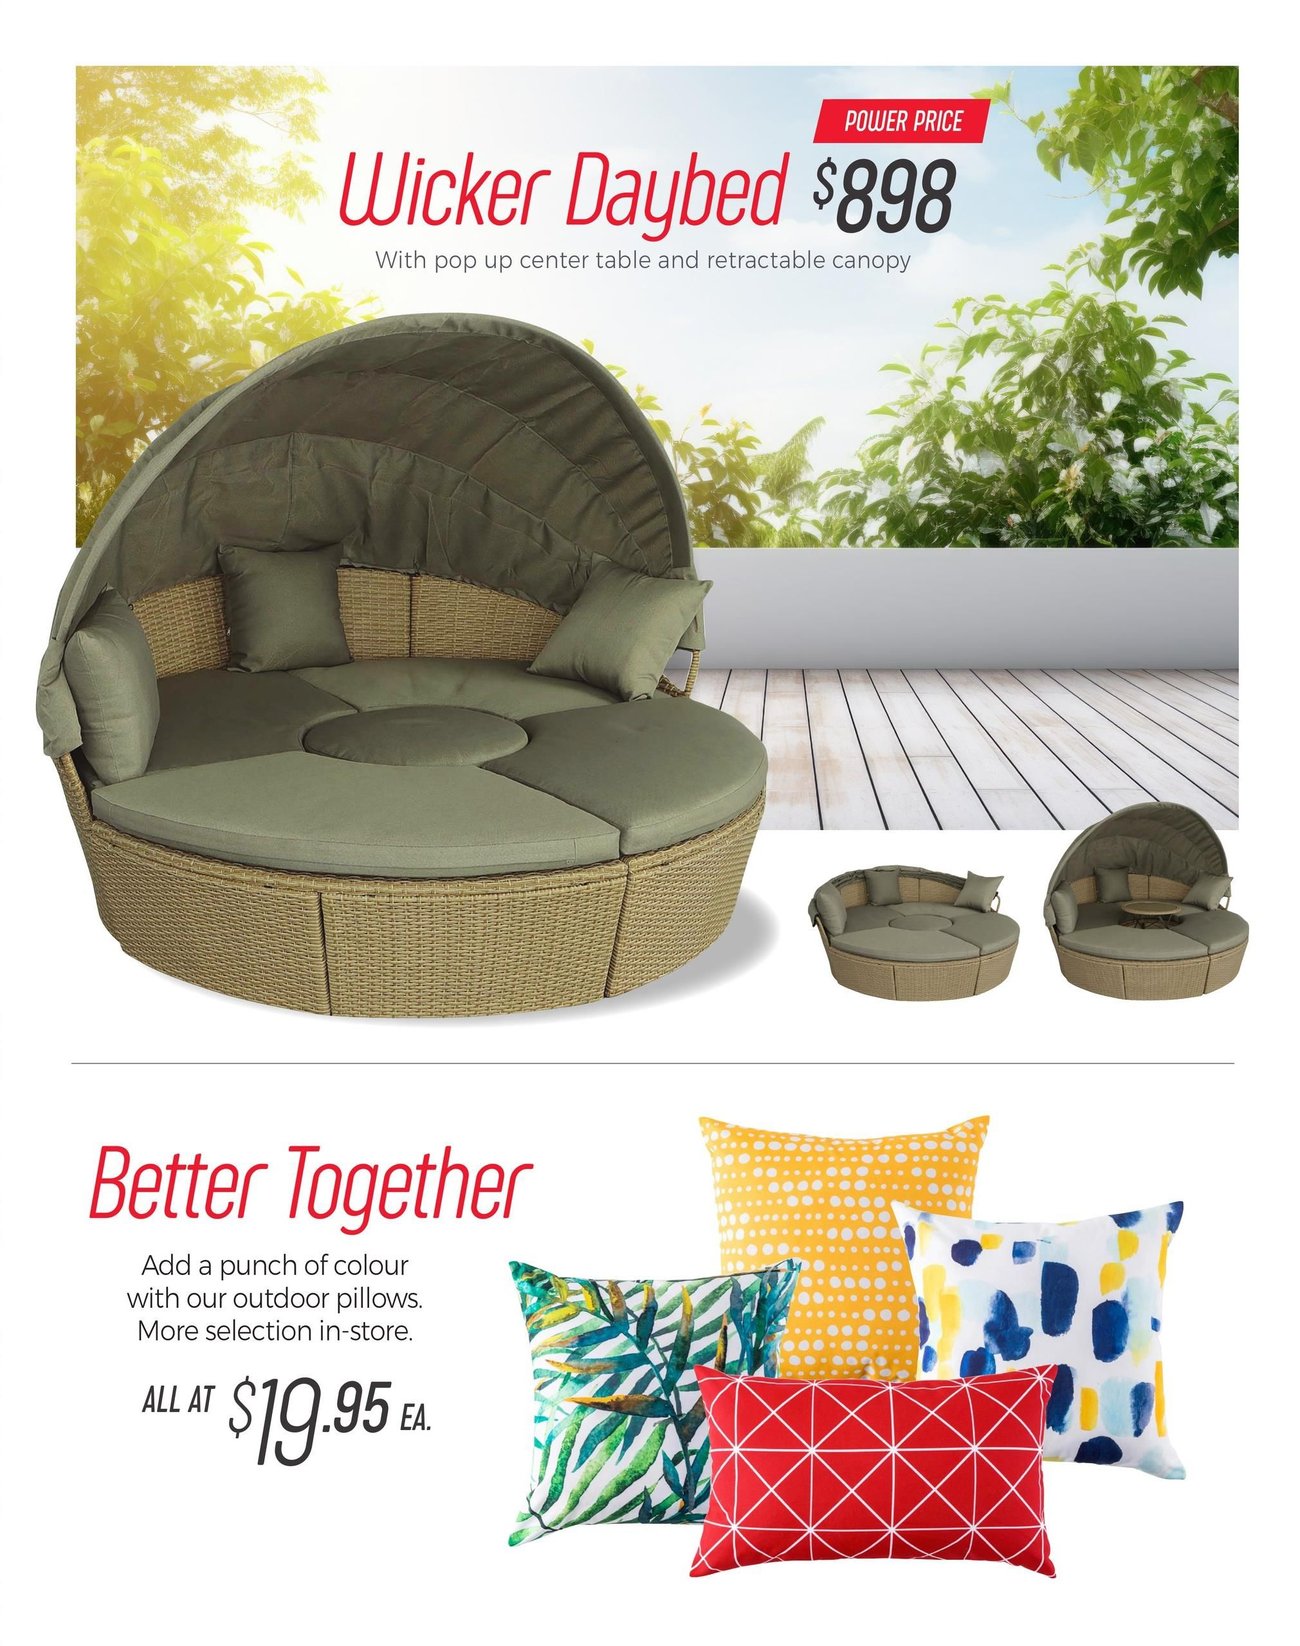 Tepperman's - Outdoor Living - Page 7